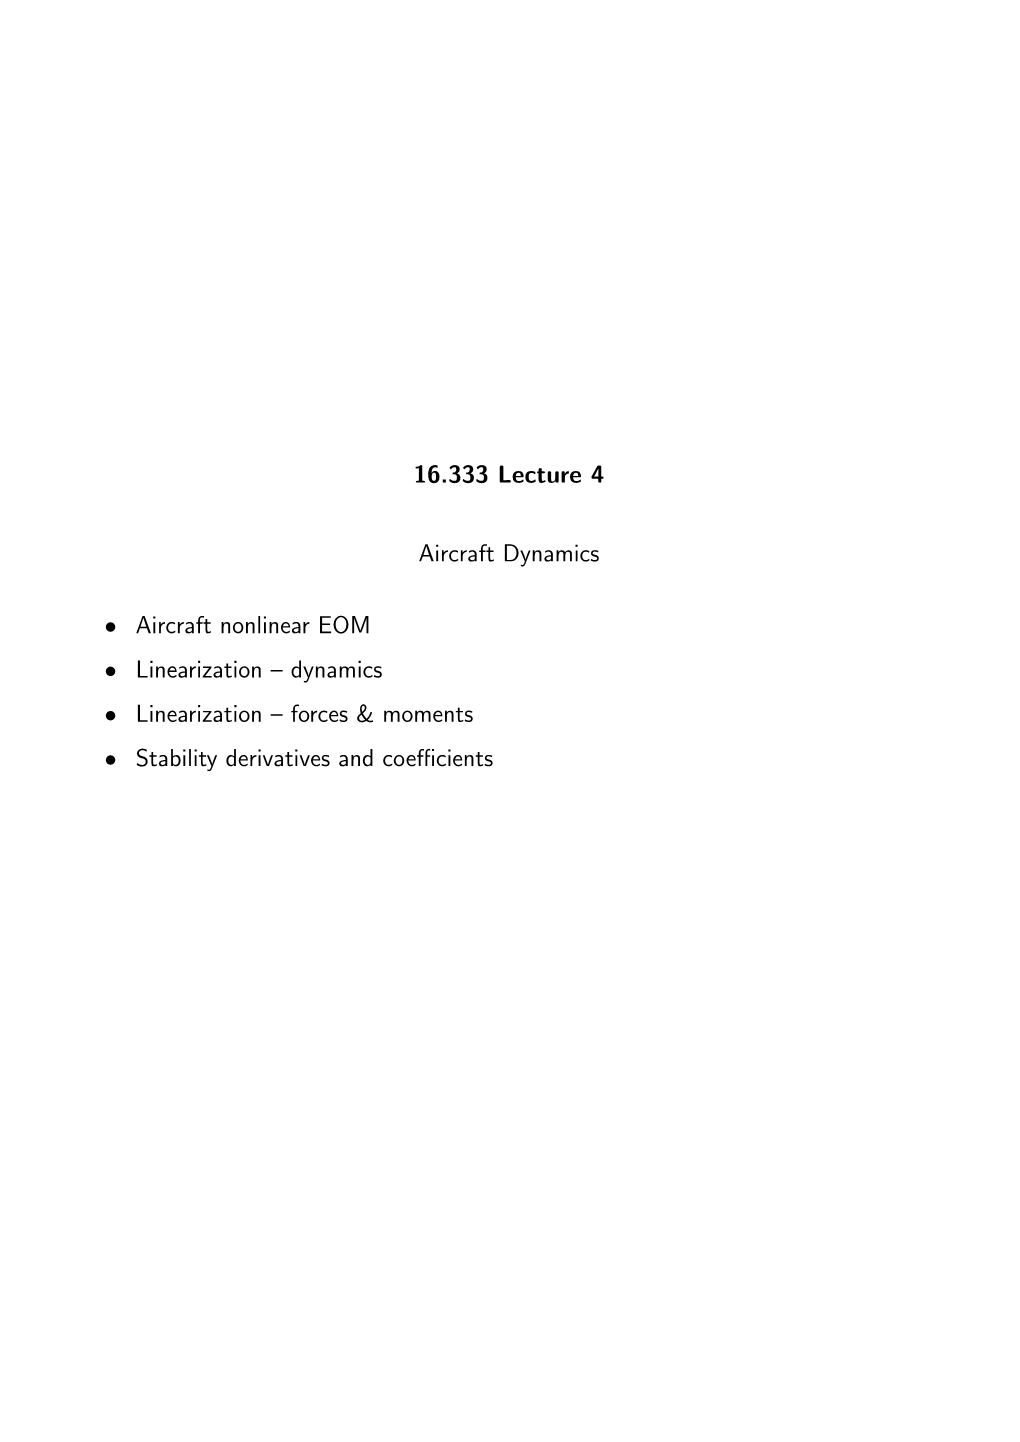 16.333 Lecture 4 Aircraft Dynamics Aircraft Nonlinear EOM